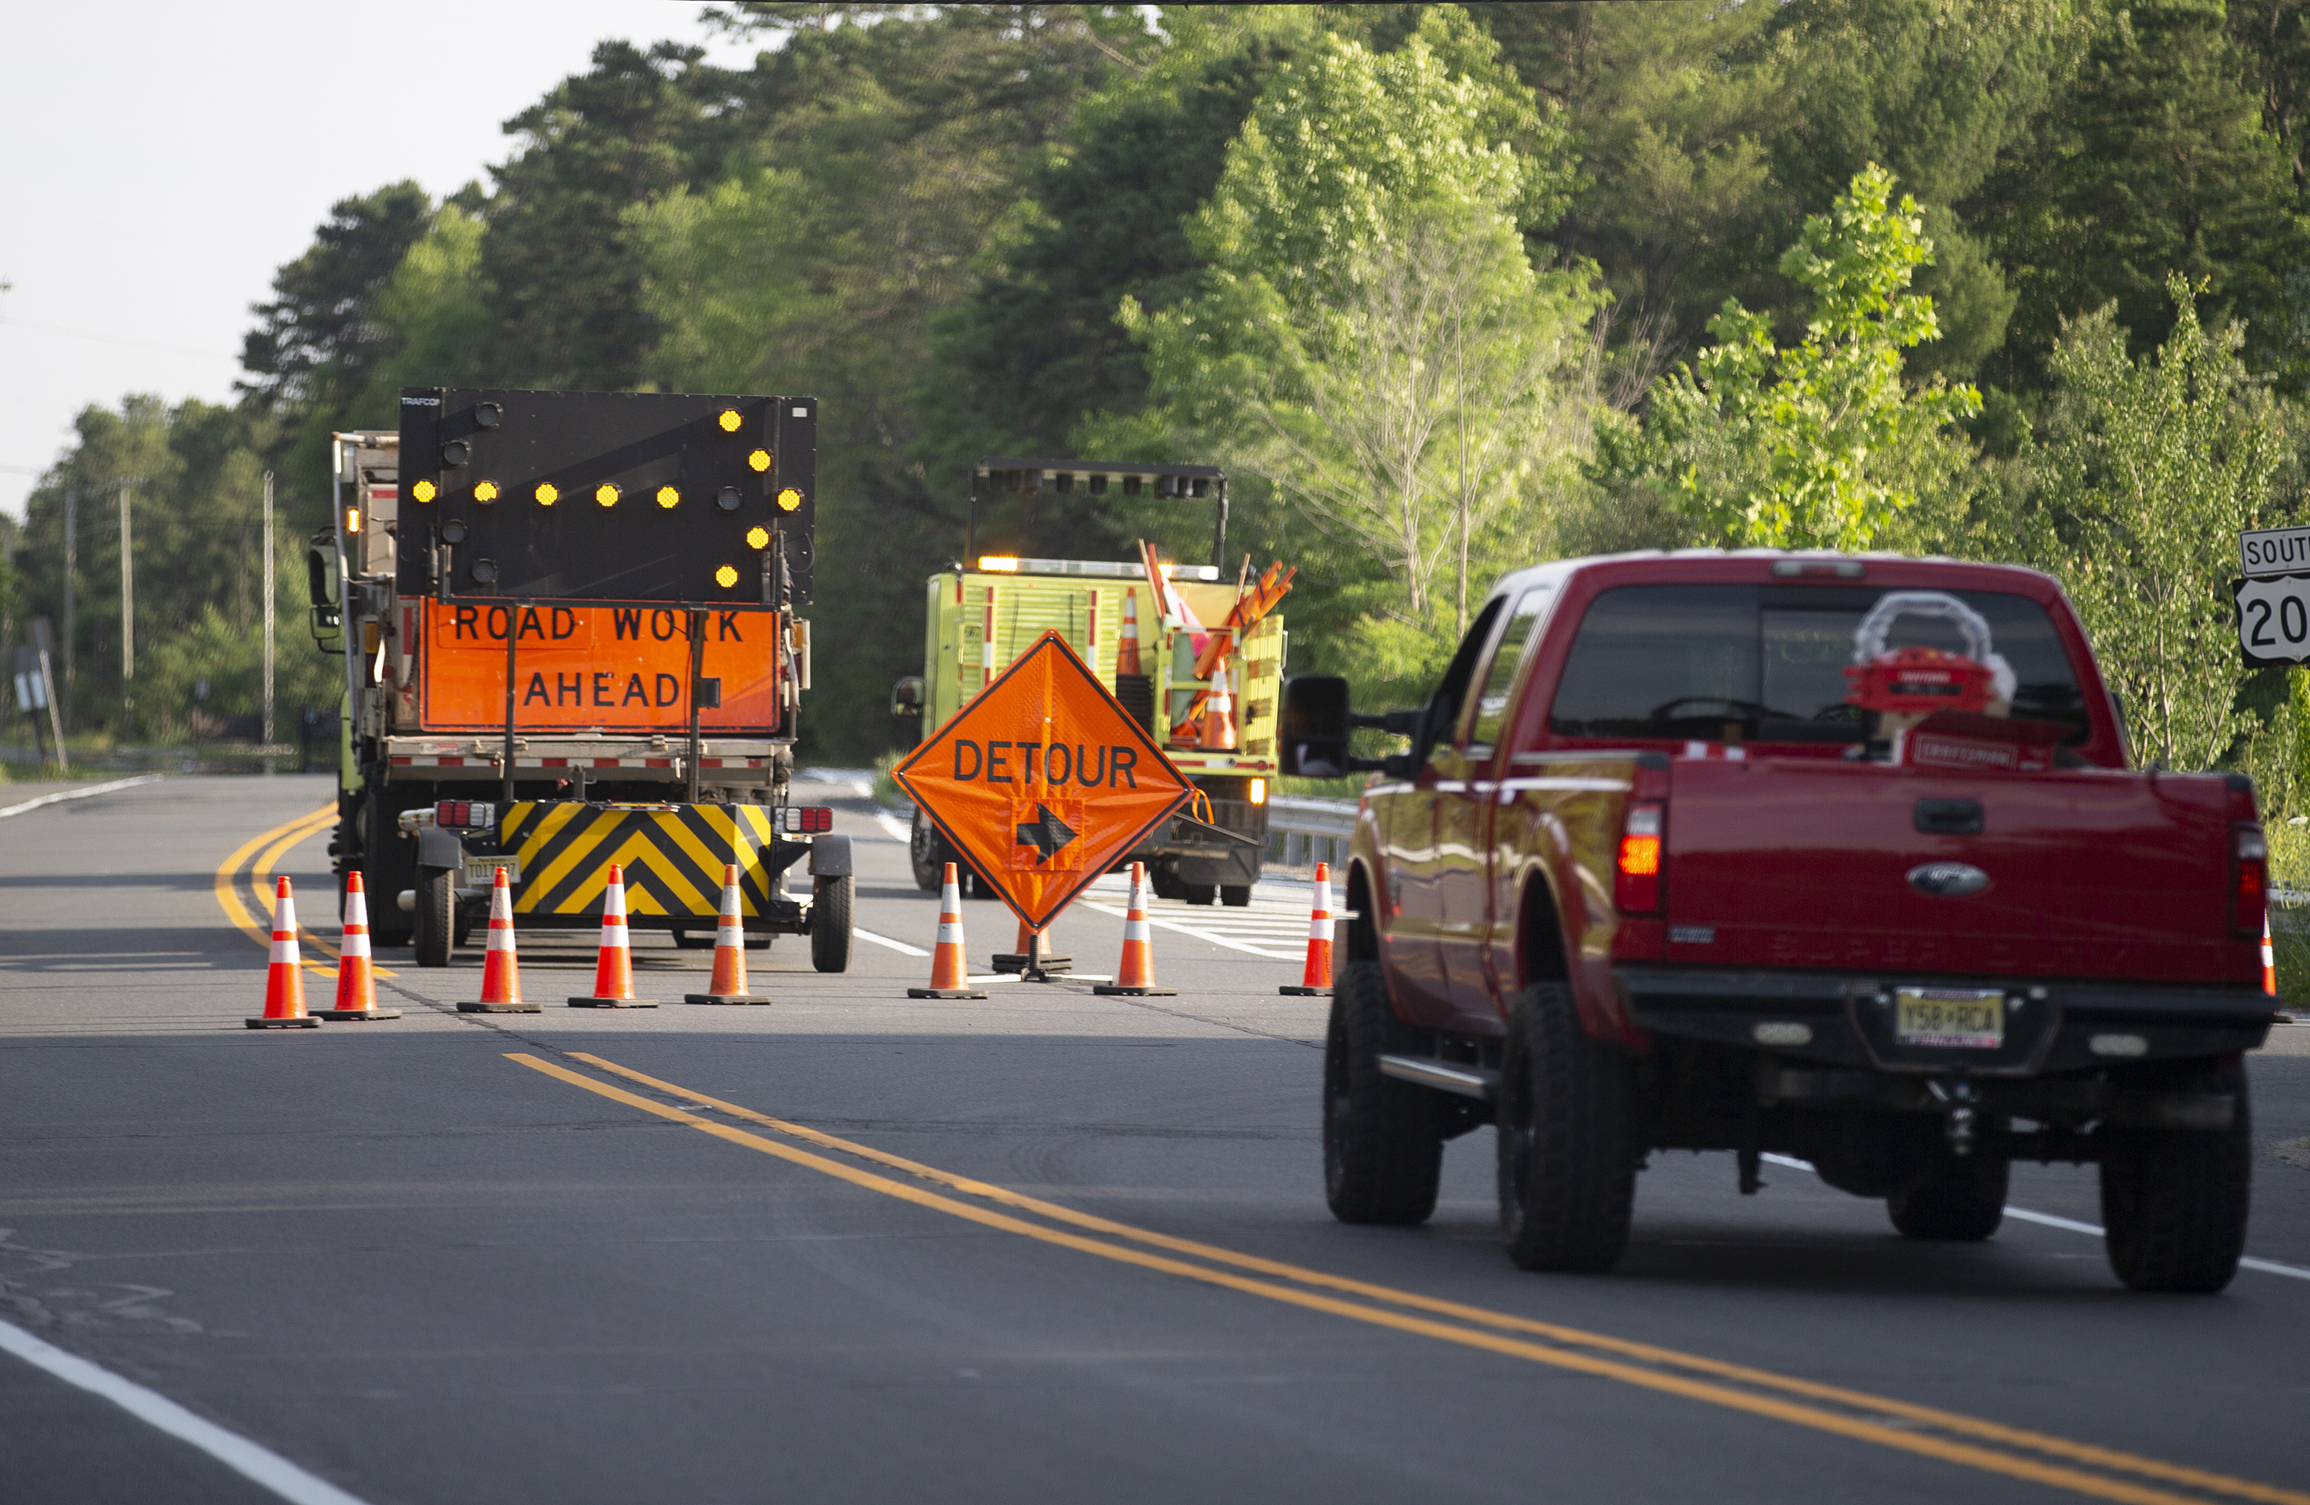 PHOTO: Route 206 is closed to traffic north of Hammontown due to a wildfire in Wharton State Park near Hammonton, N.J., June 20, 2022.